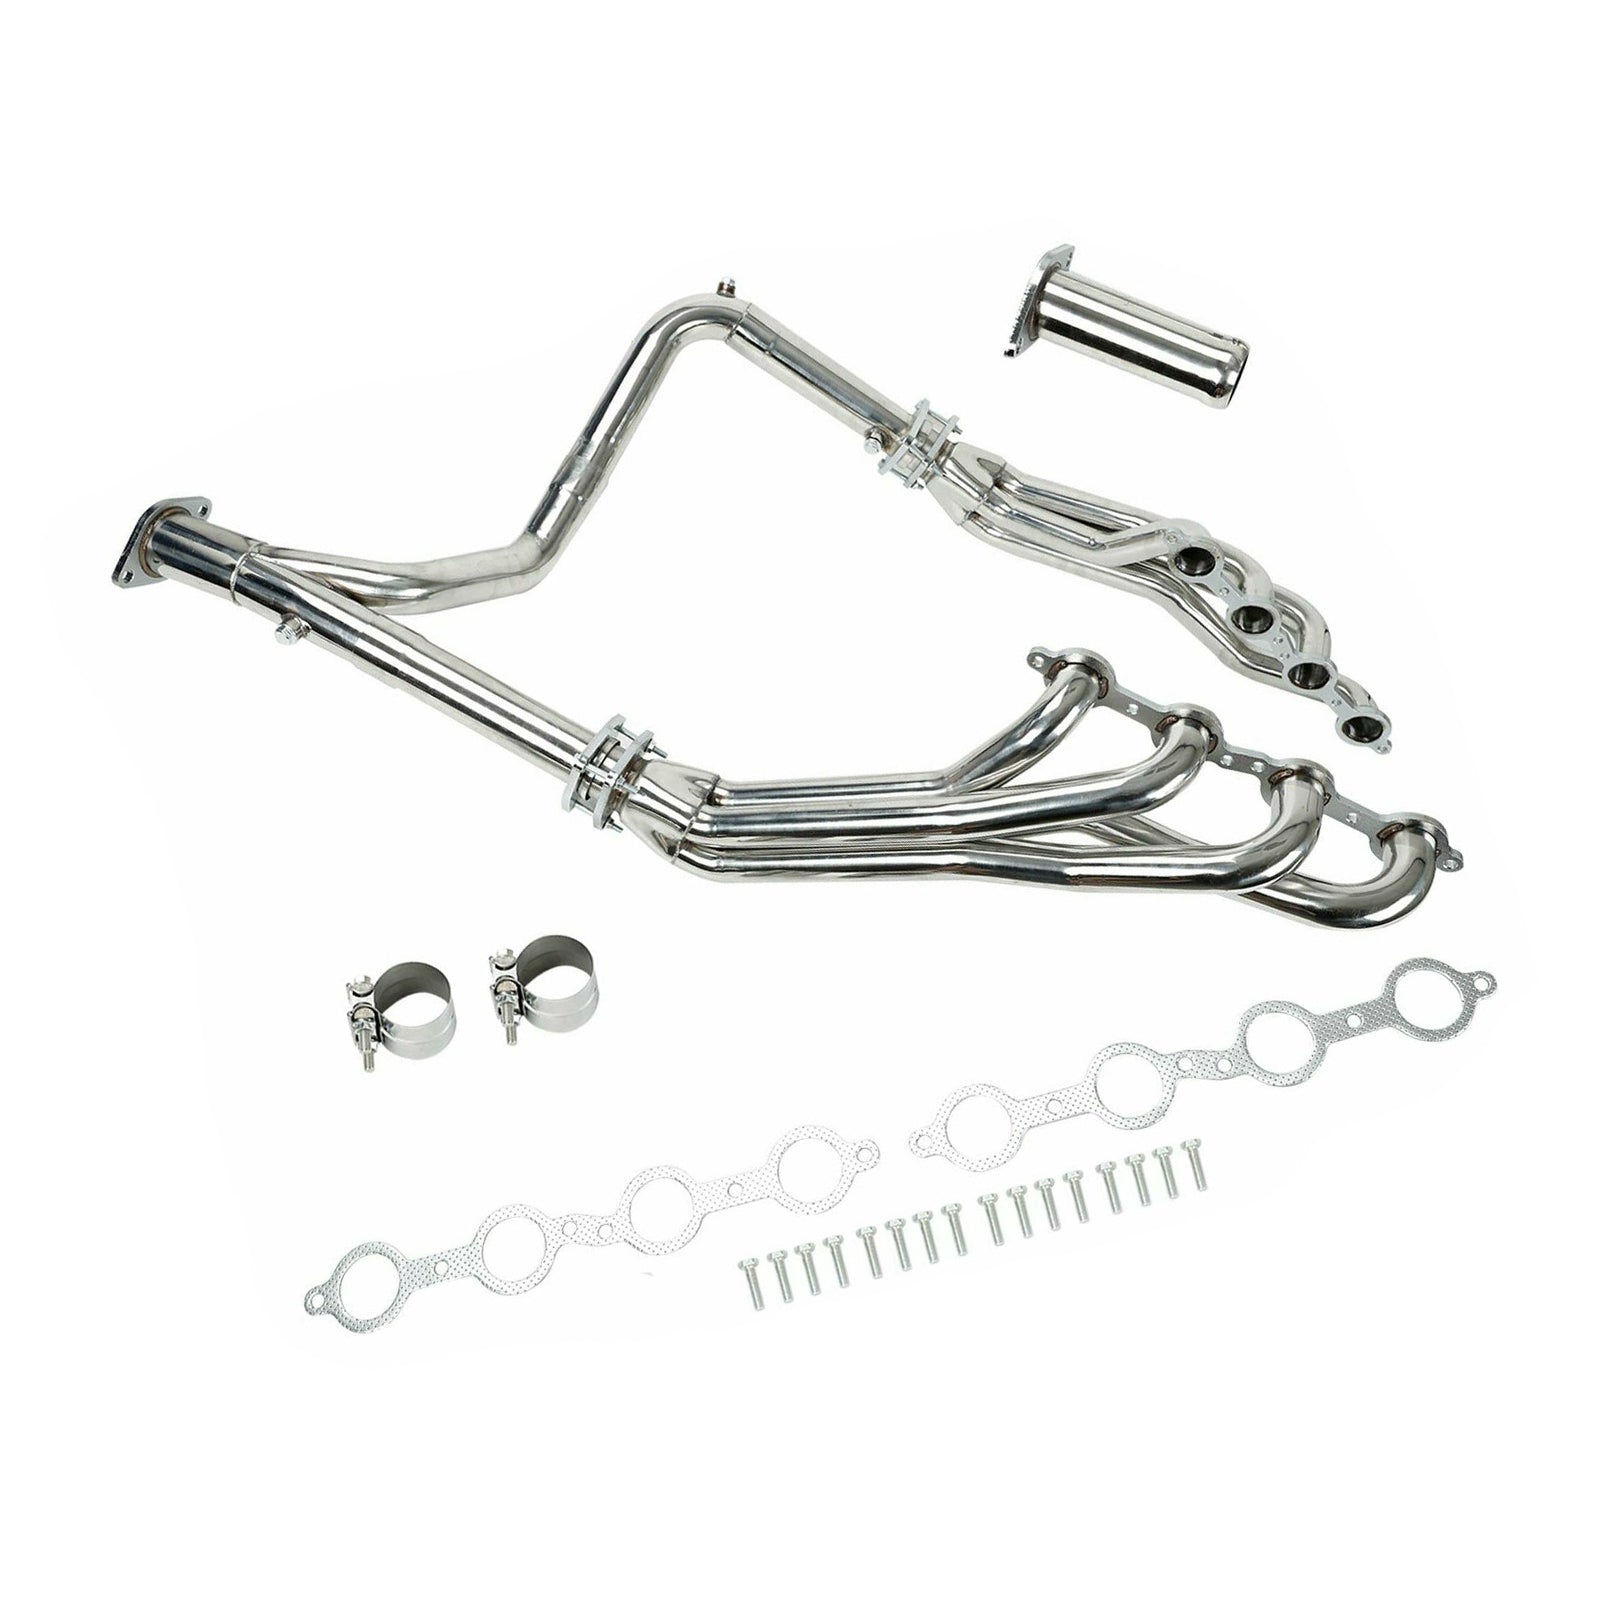 Chevrolet GMC 2007-2014 4.8L 5.3L 6.0L Stainless Steel Exhaust Manifold Headers